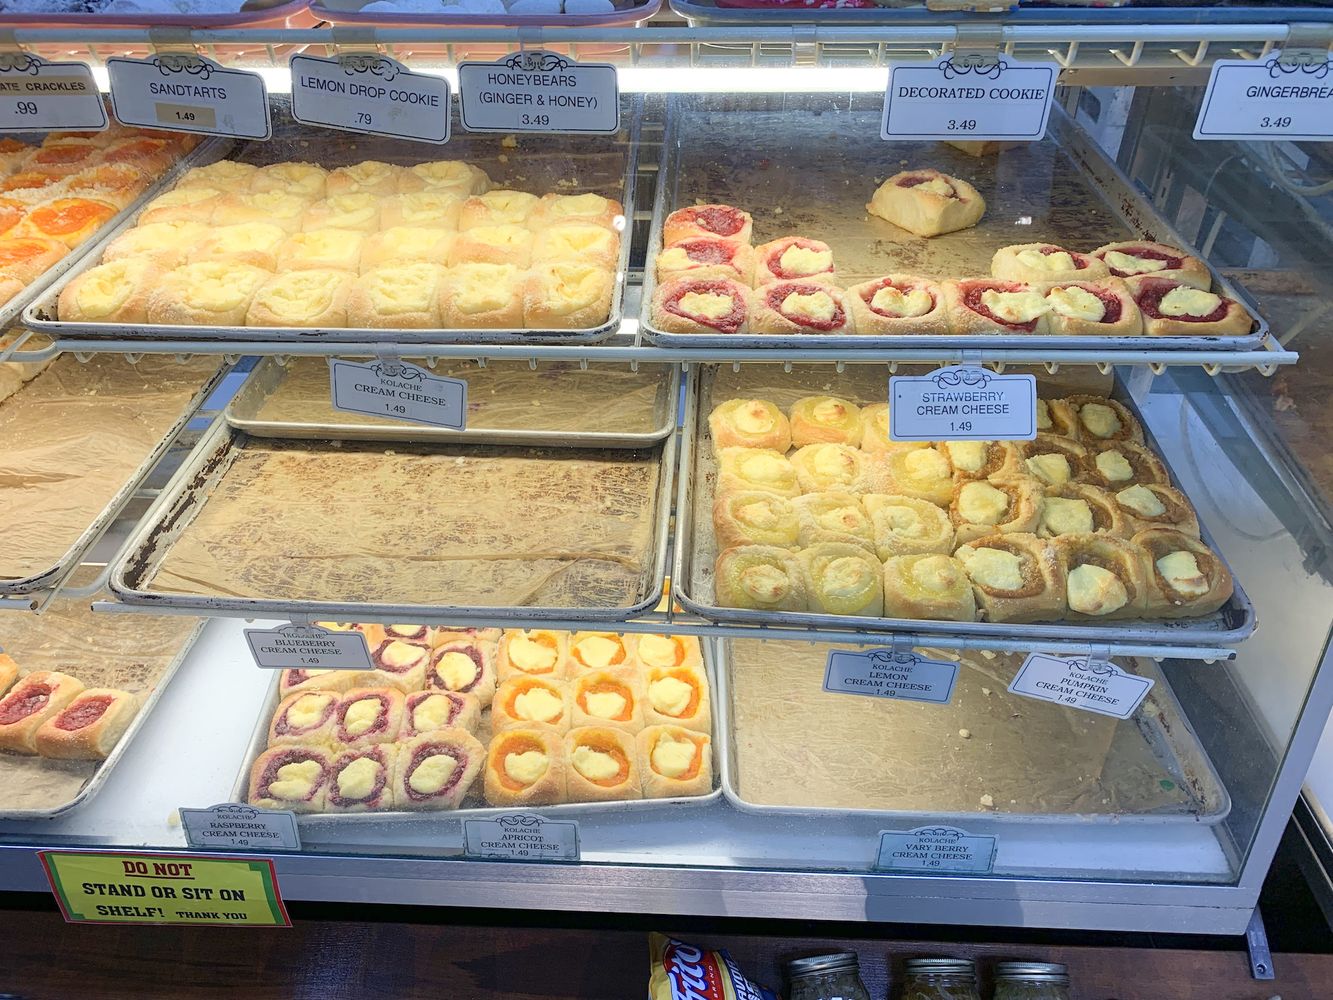 Kolaches at the Czech Stop in West, TX